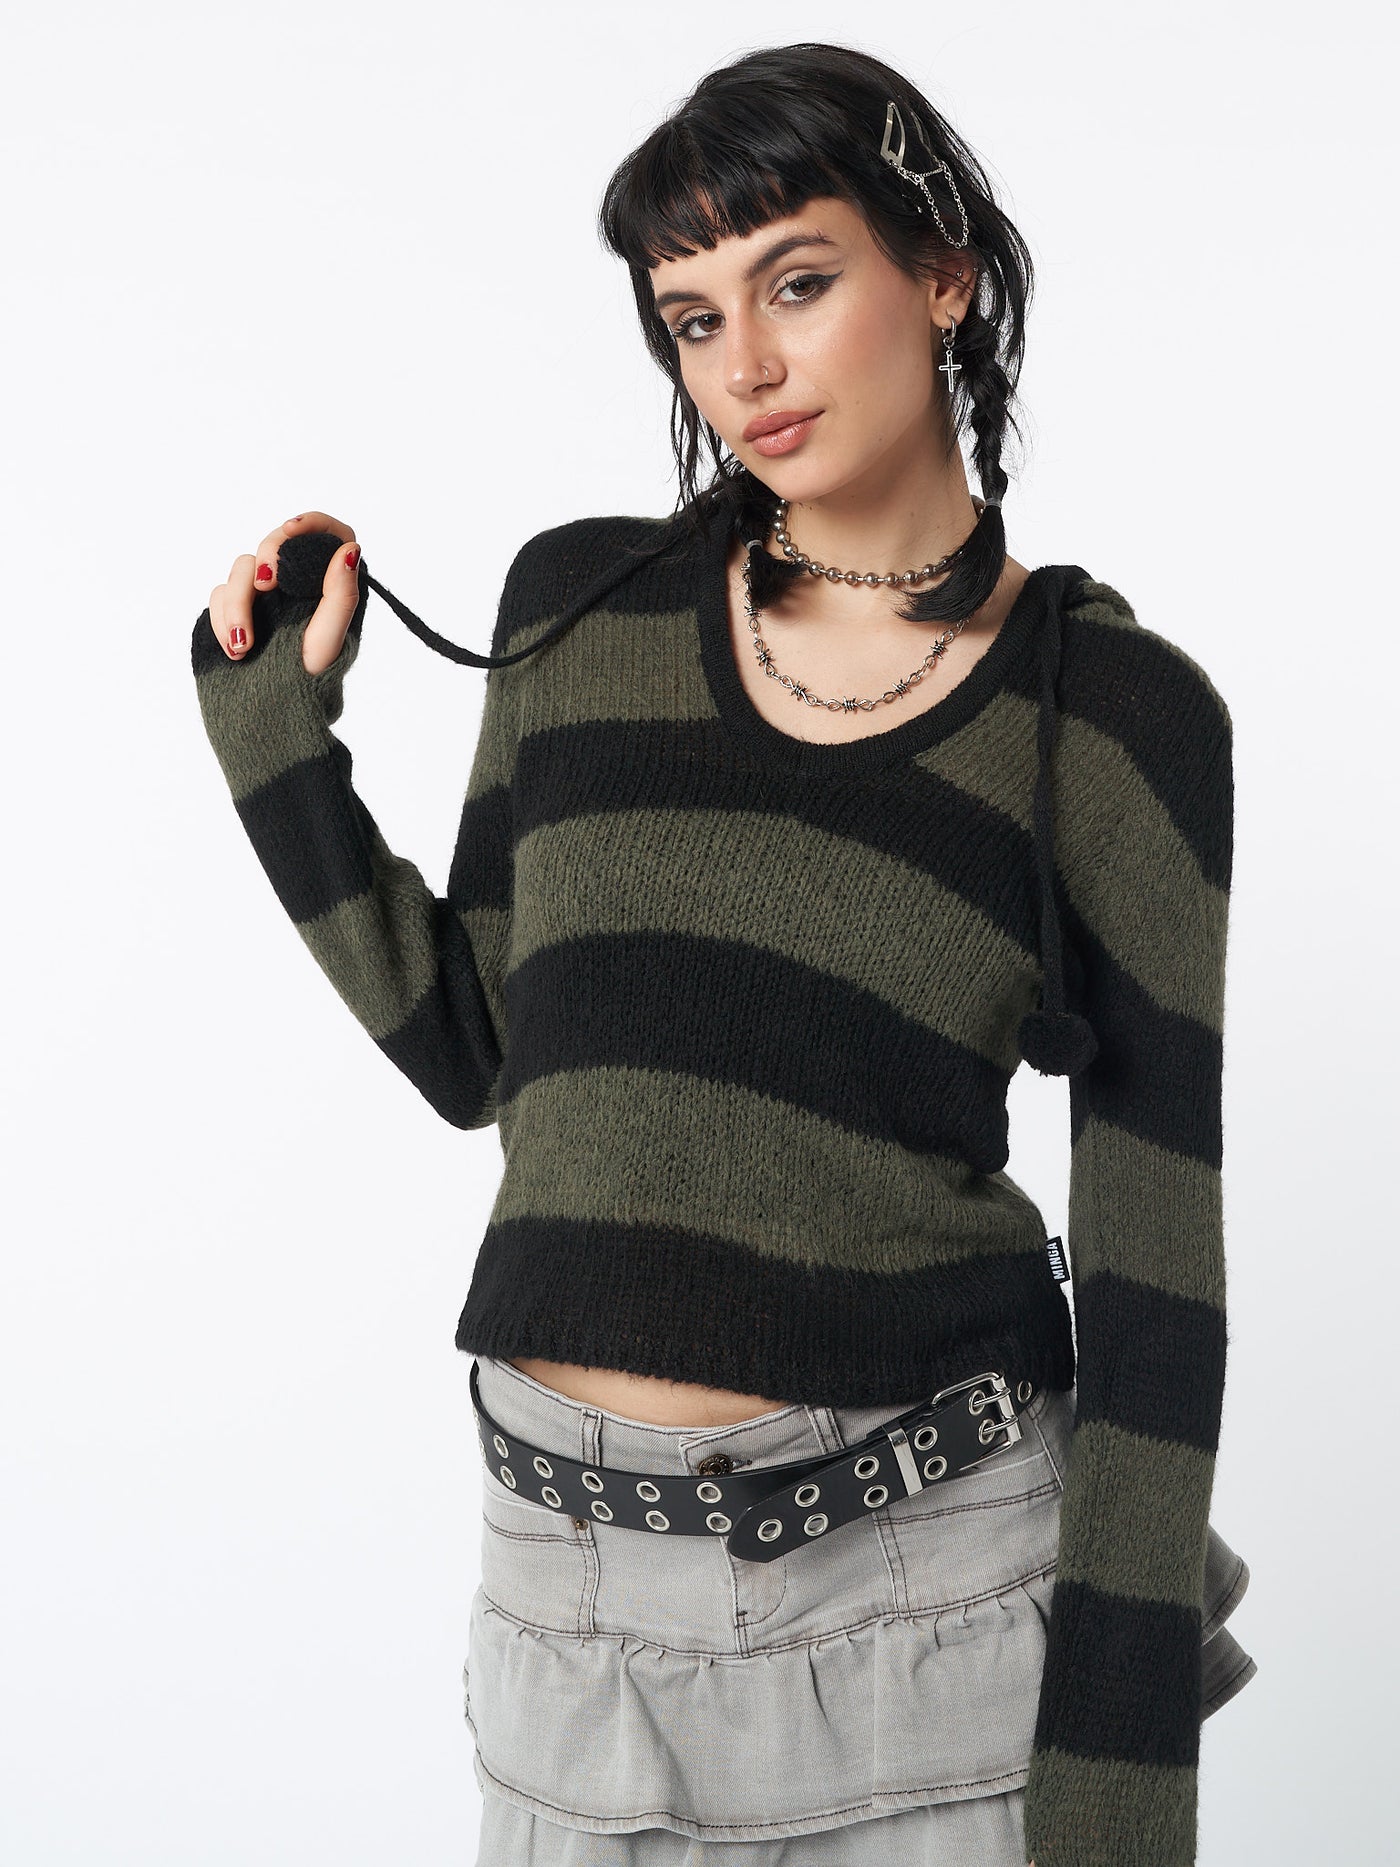 Hooded knit jumper with stripes in black and green featuring pom pom drawstring and thumbhole cuffs